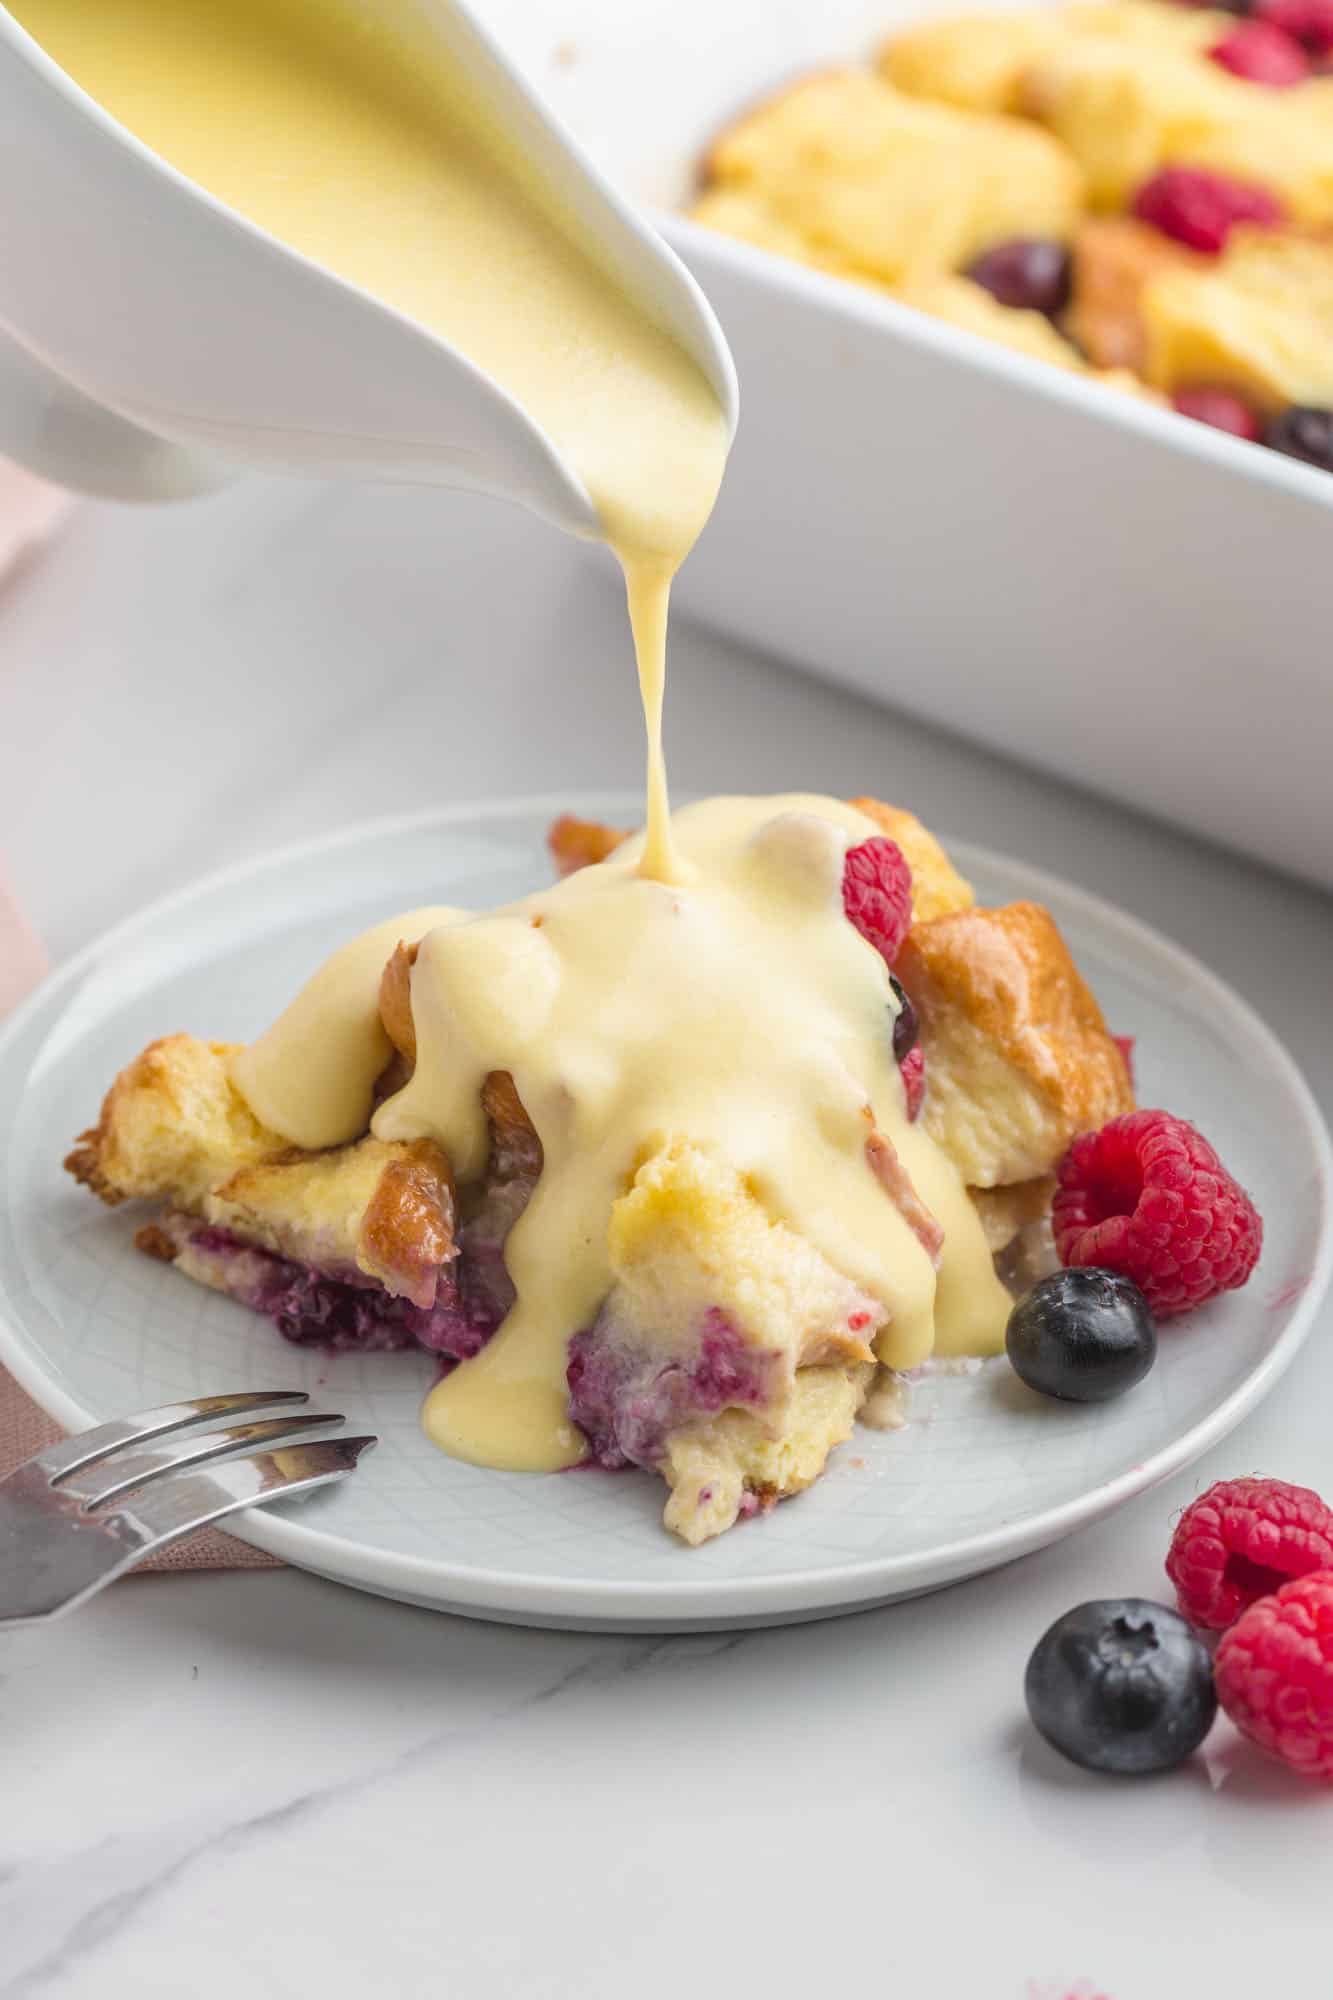 Pouring warm vanilla sauce over a serving of berry bread pudding on a small plate, with fresh berries and a fork on the side.